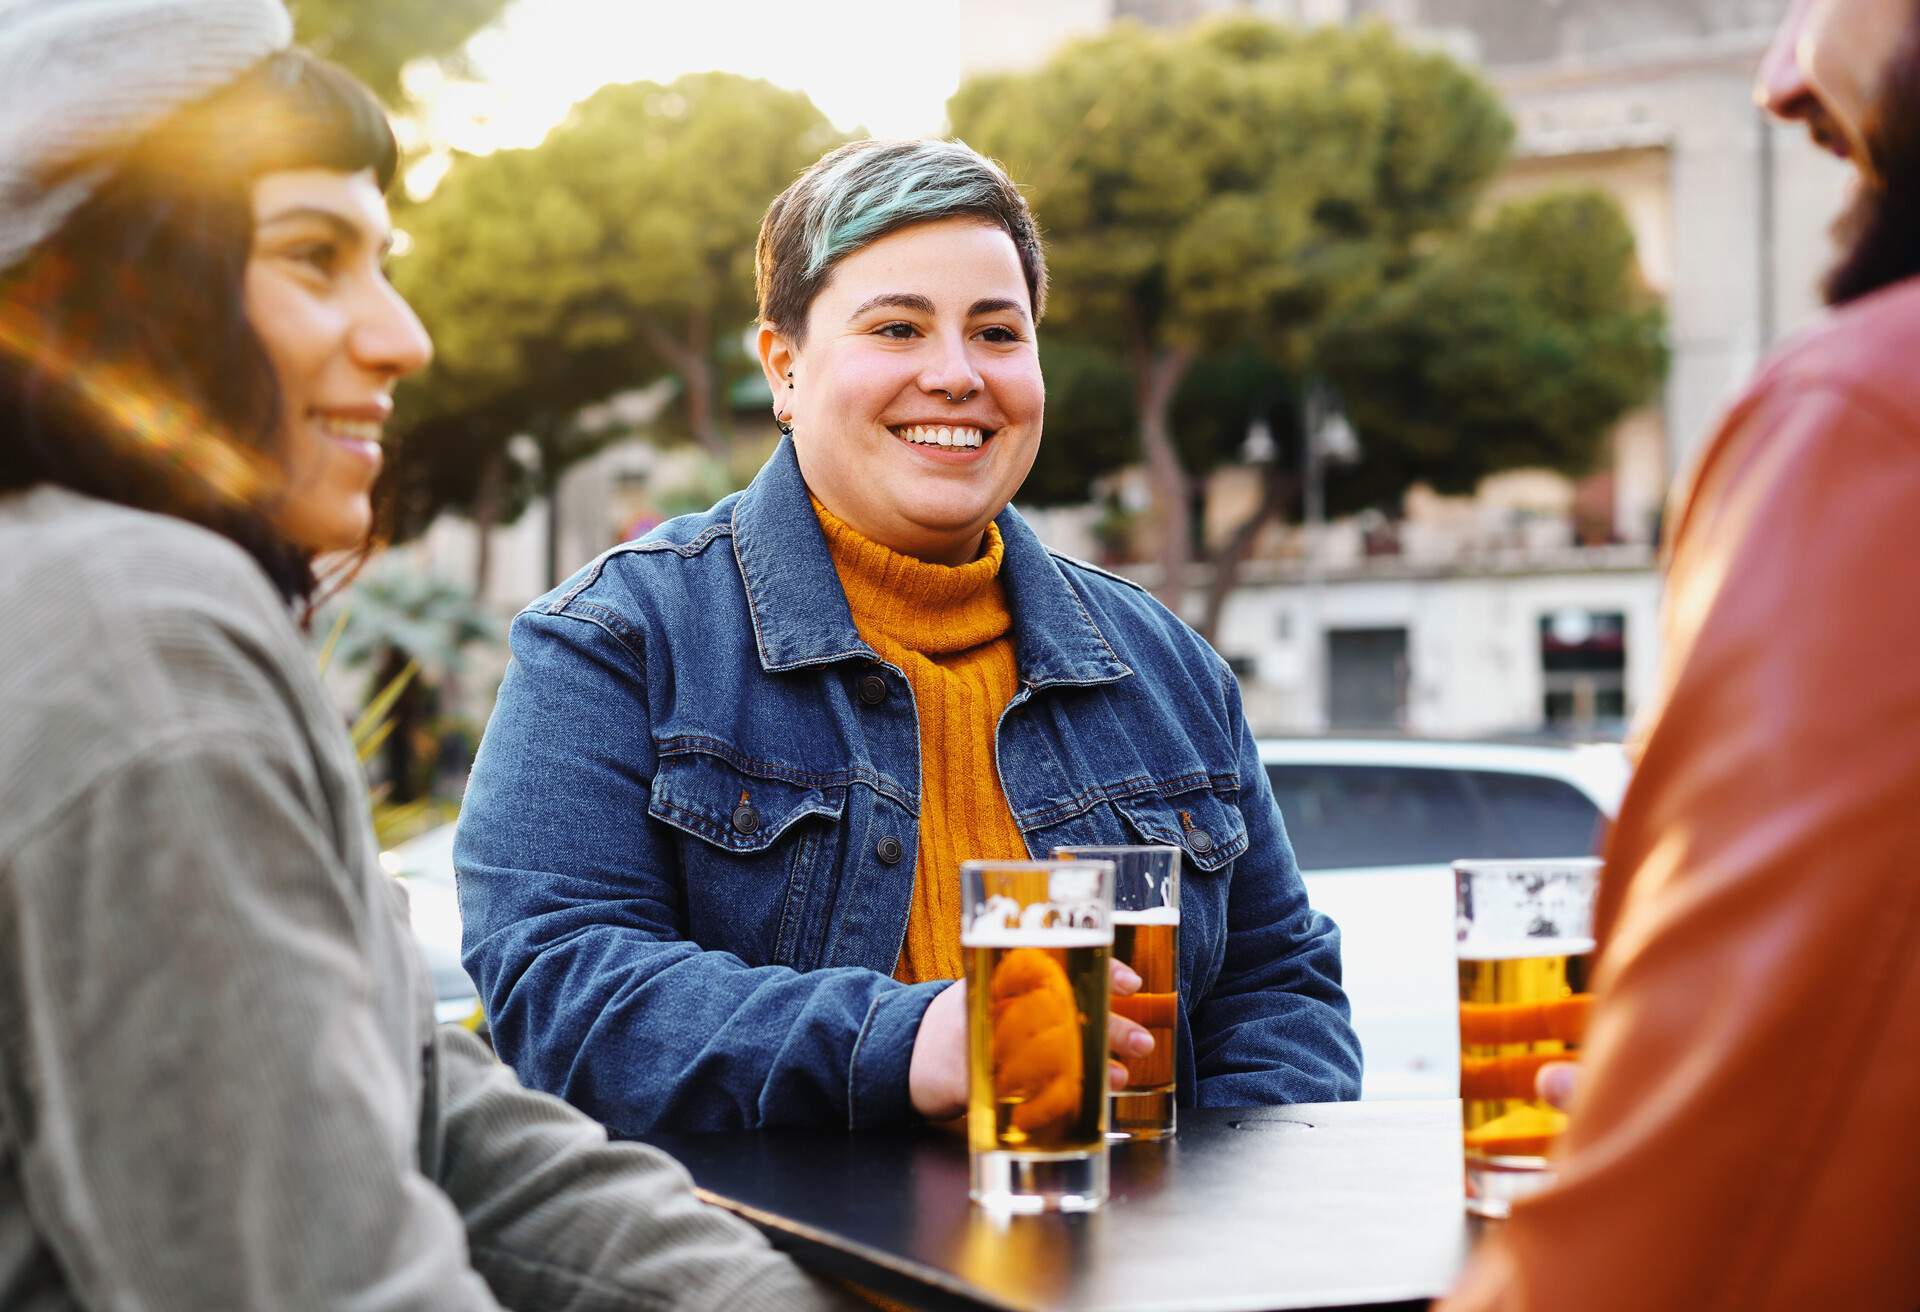 LGBTQ_DIVERSE_PEOPLE_DRINKING_BEER_OUTDOOR